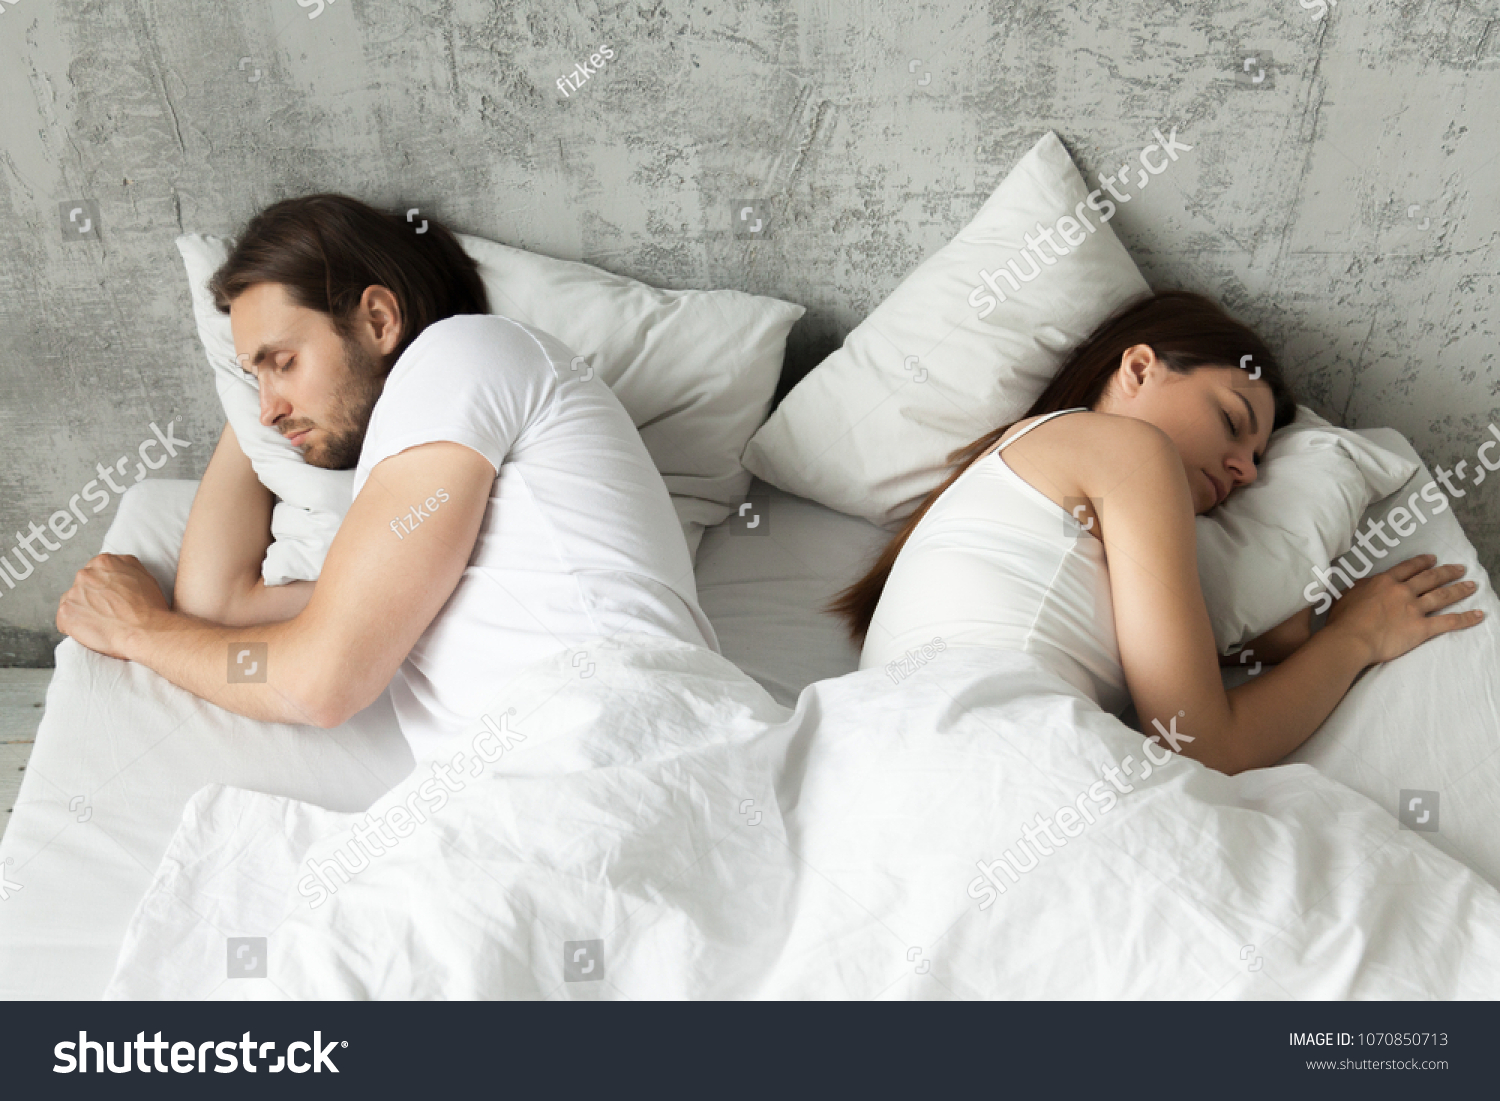 Unhappy indifferent couple sleeping separately back to back keeping distance lying in bed at home, married man and woman ignoring each other avoiding sex, having conflict or sexual problems concept #1070850713